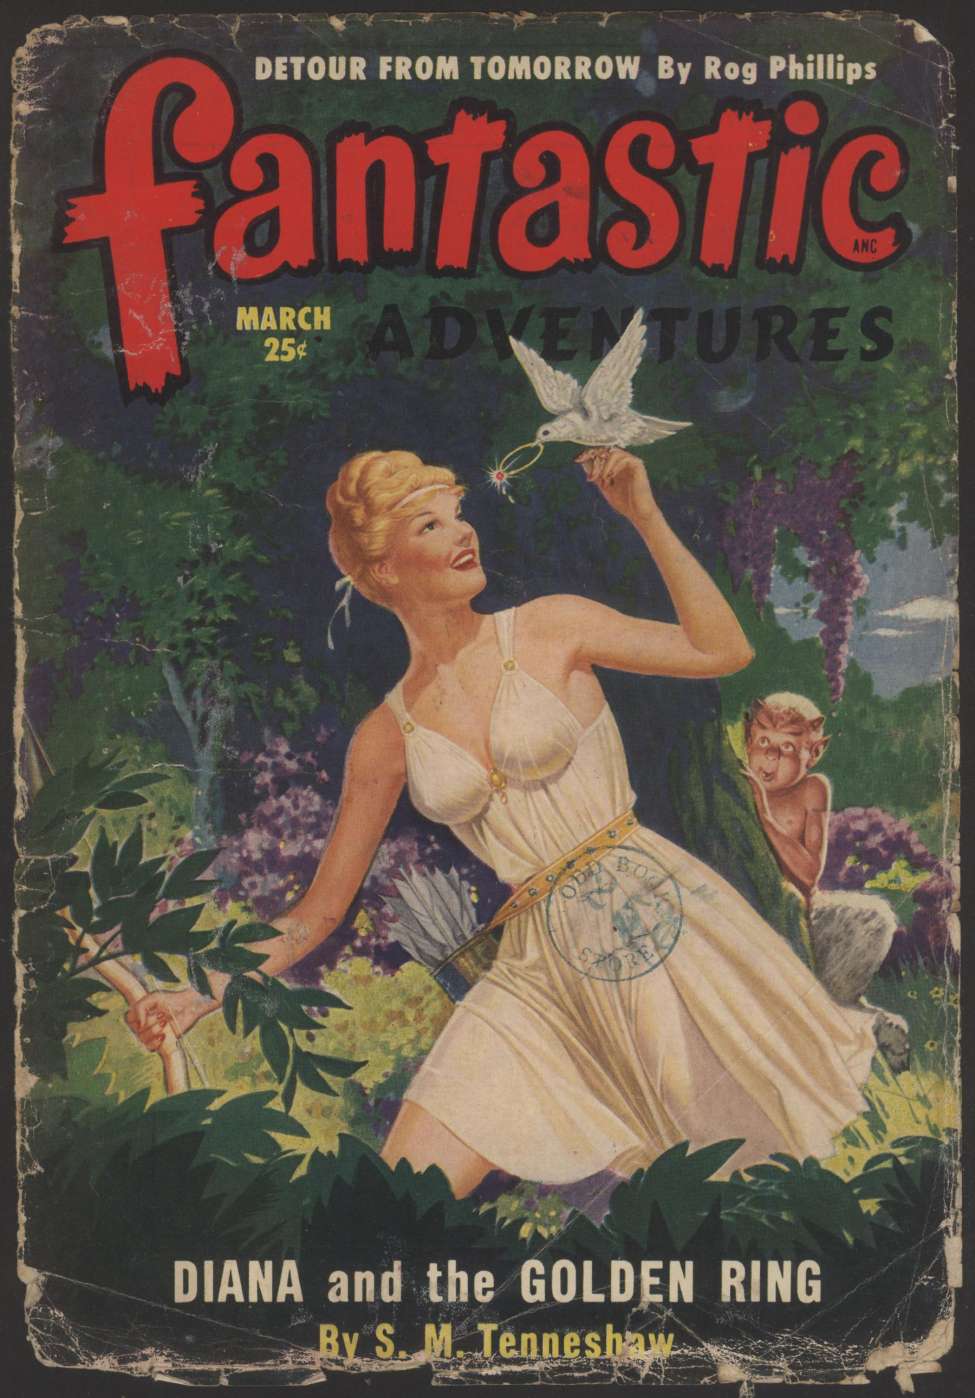 Book Cover For Fantastic Adventures v12 3 - Diana and the Golden Ring - S. M. Tenneshaw